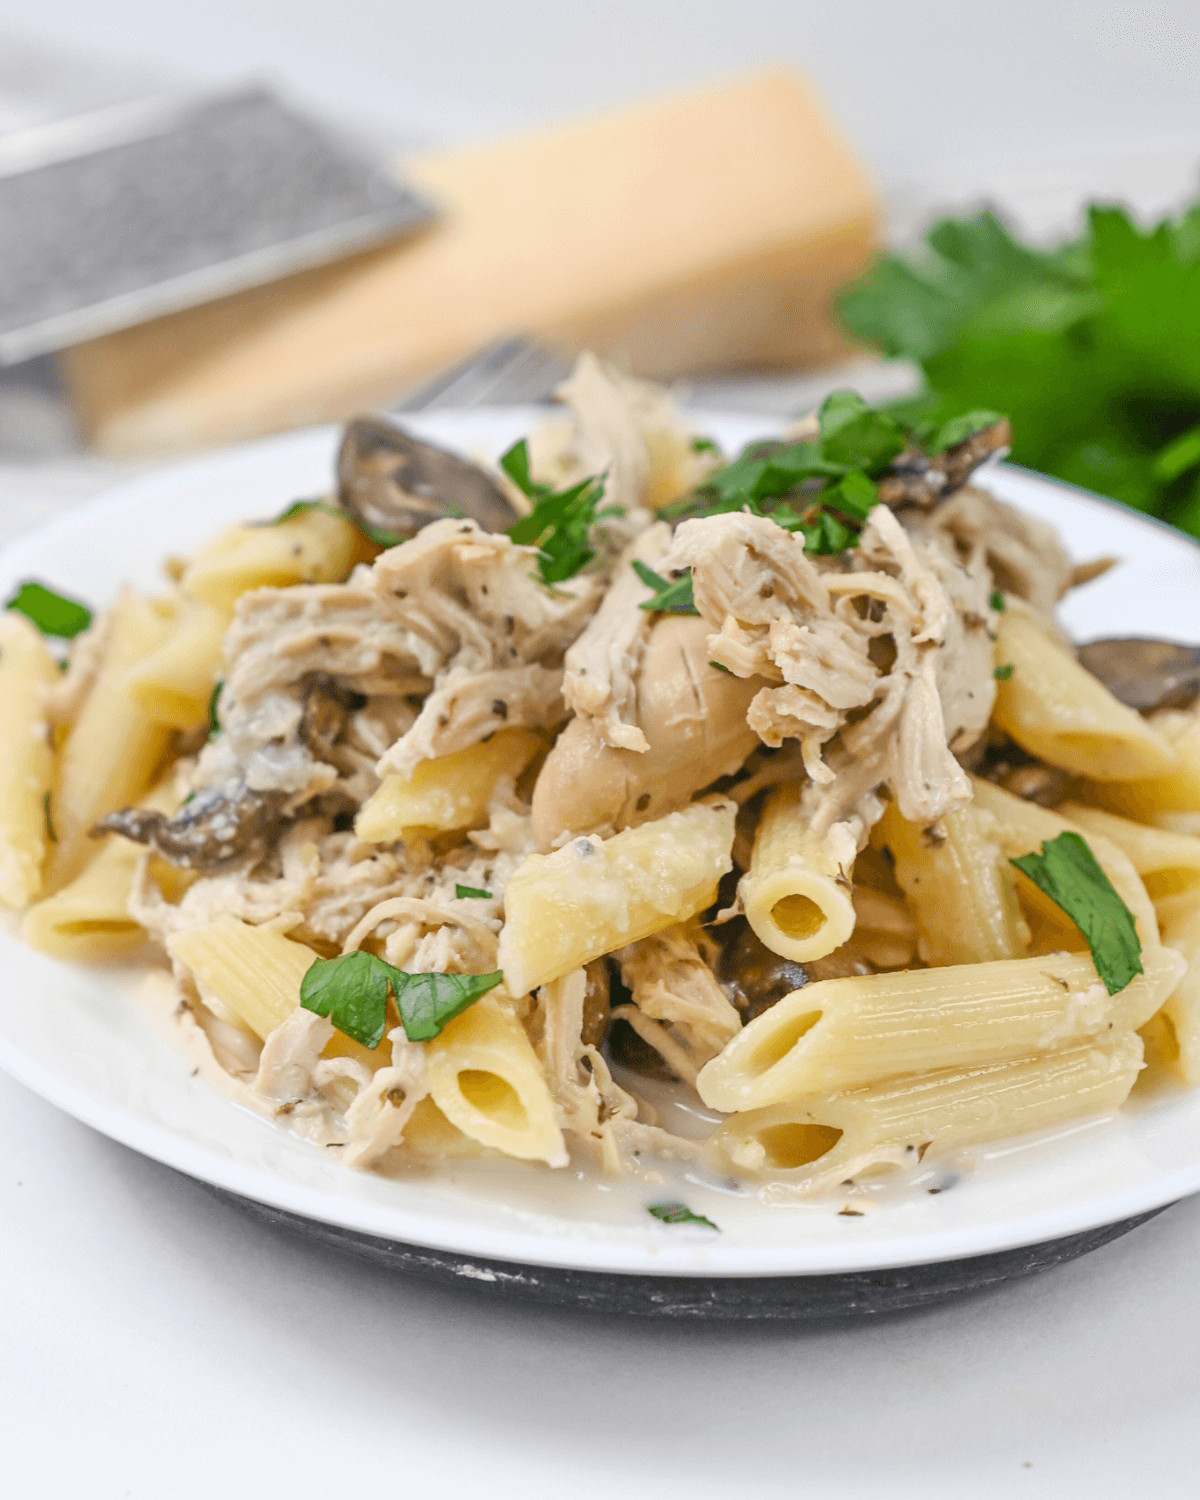 A plate of Slow Cooker Chicken Pasta with mushrooms and parsley.